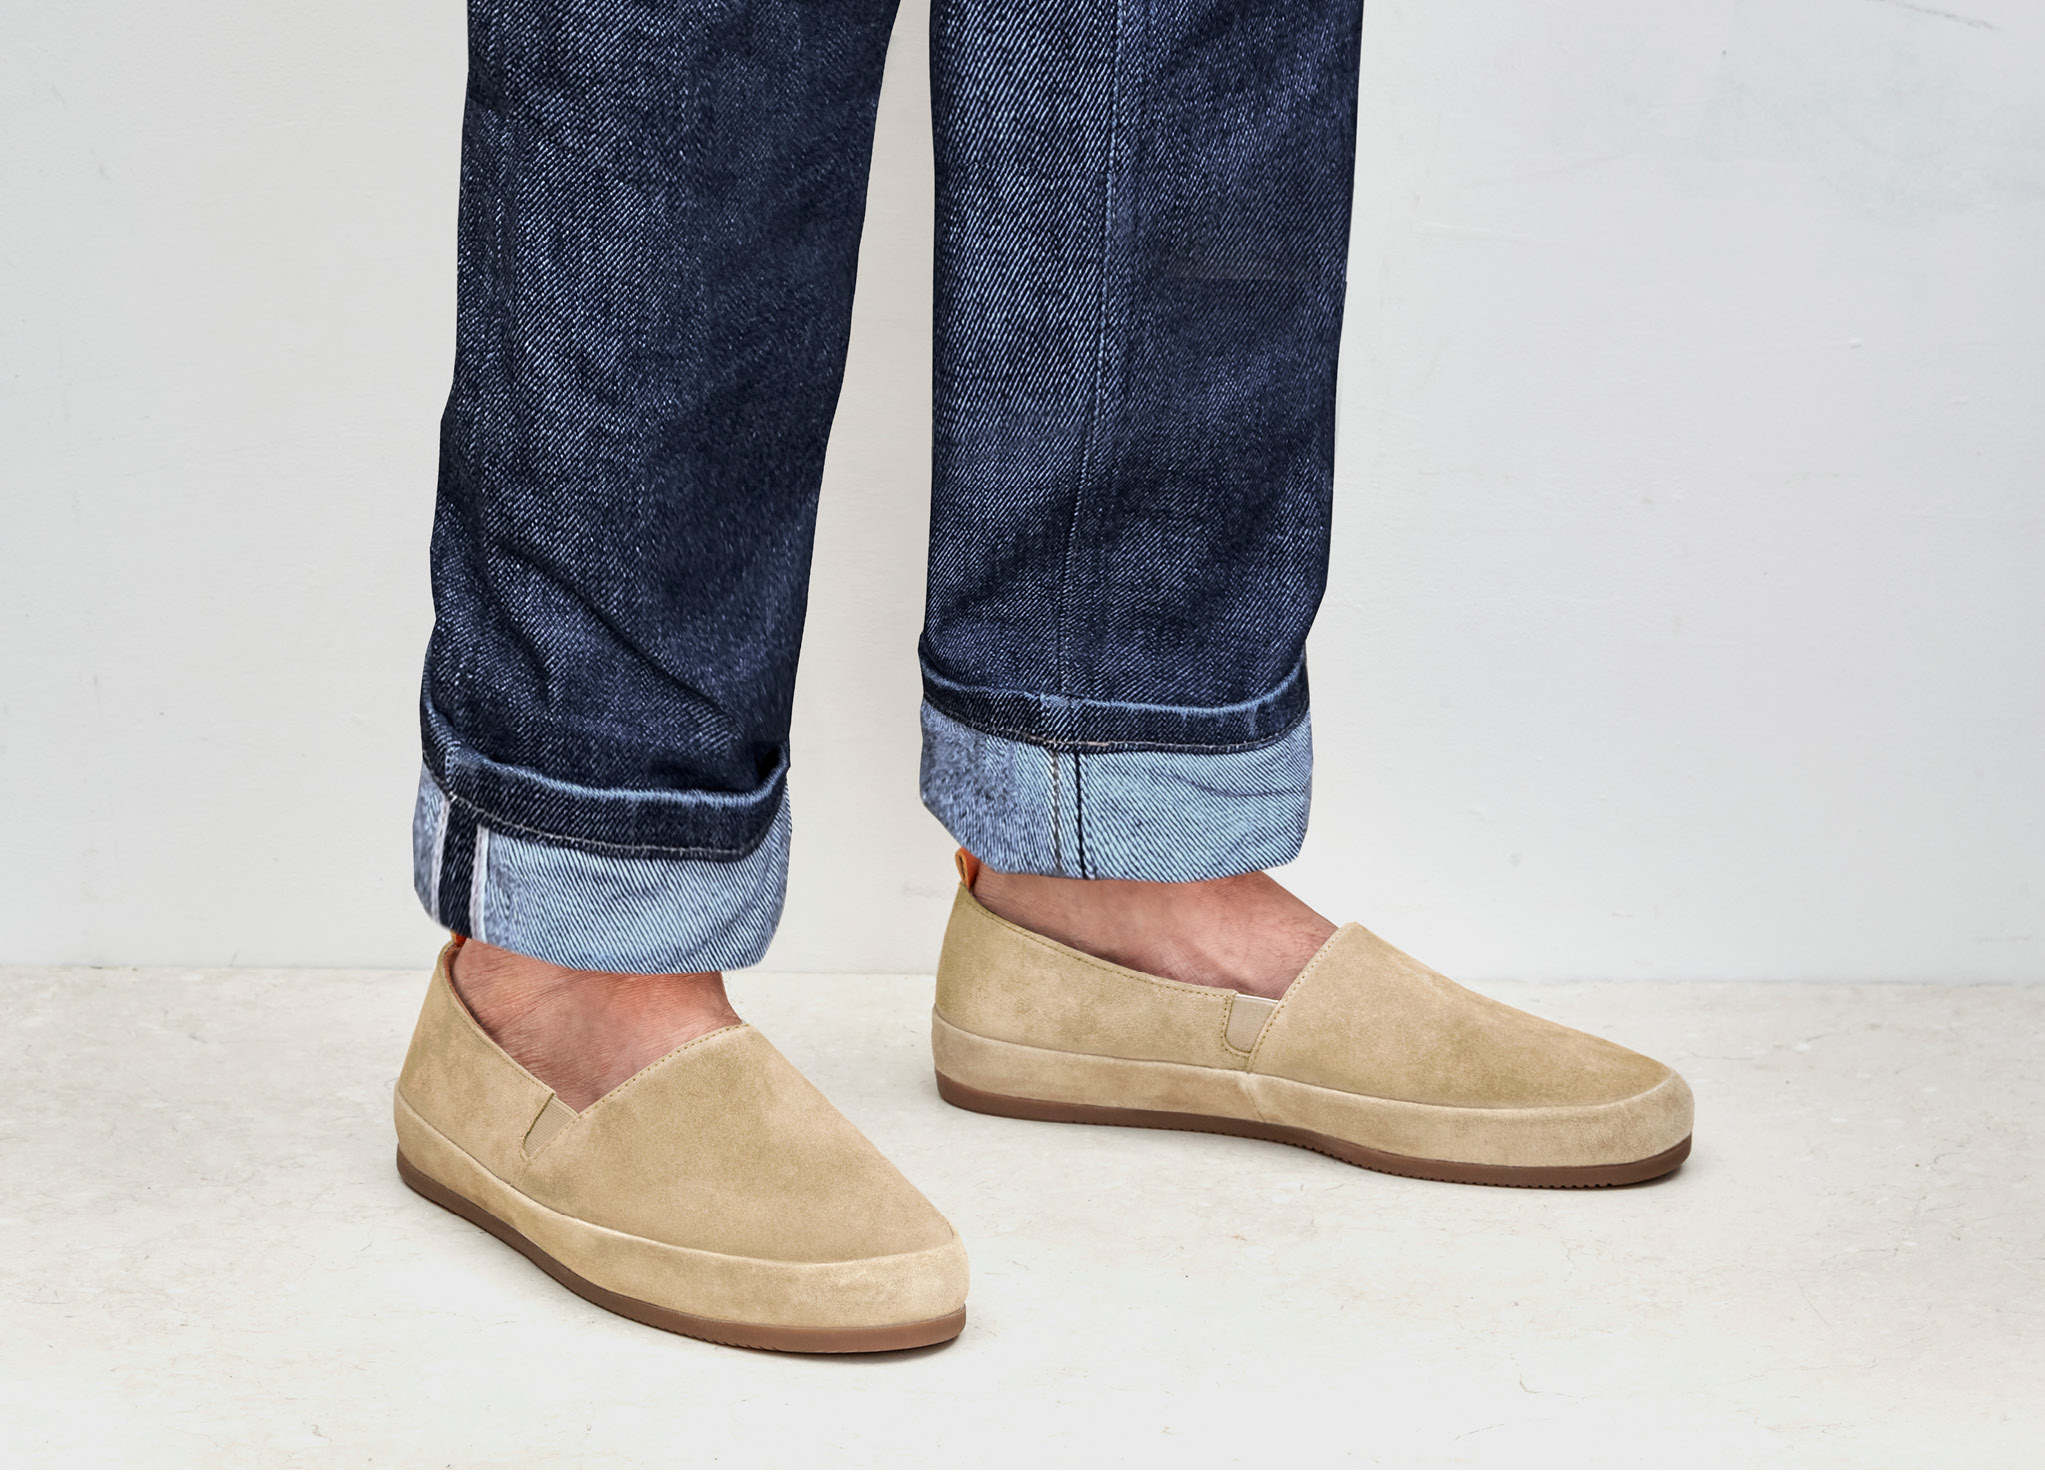 Globus Spytte ud tema Mens Tan Loafers | MULO shoes | Premium Italian Suede Leather